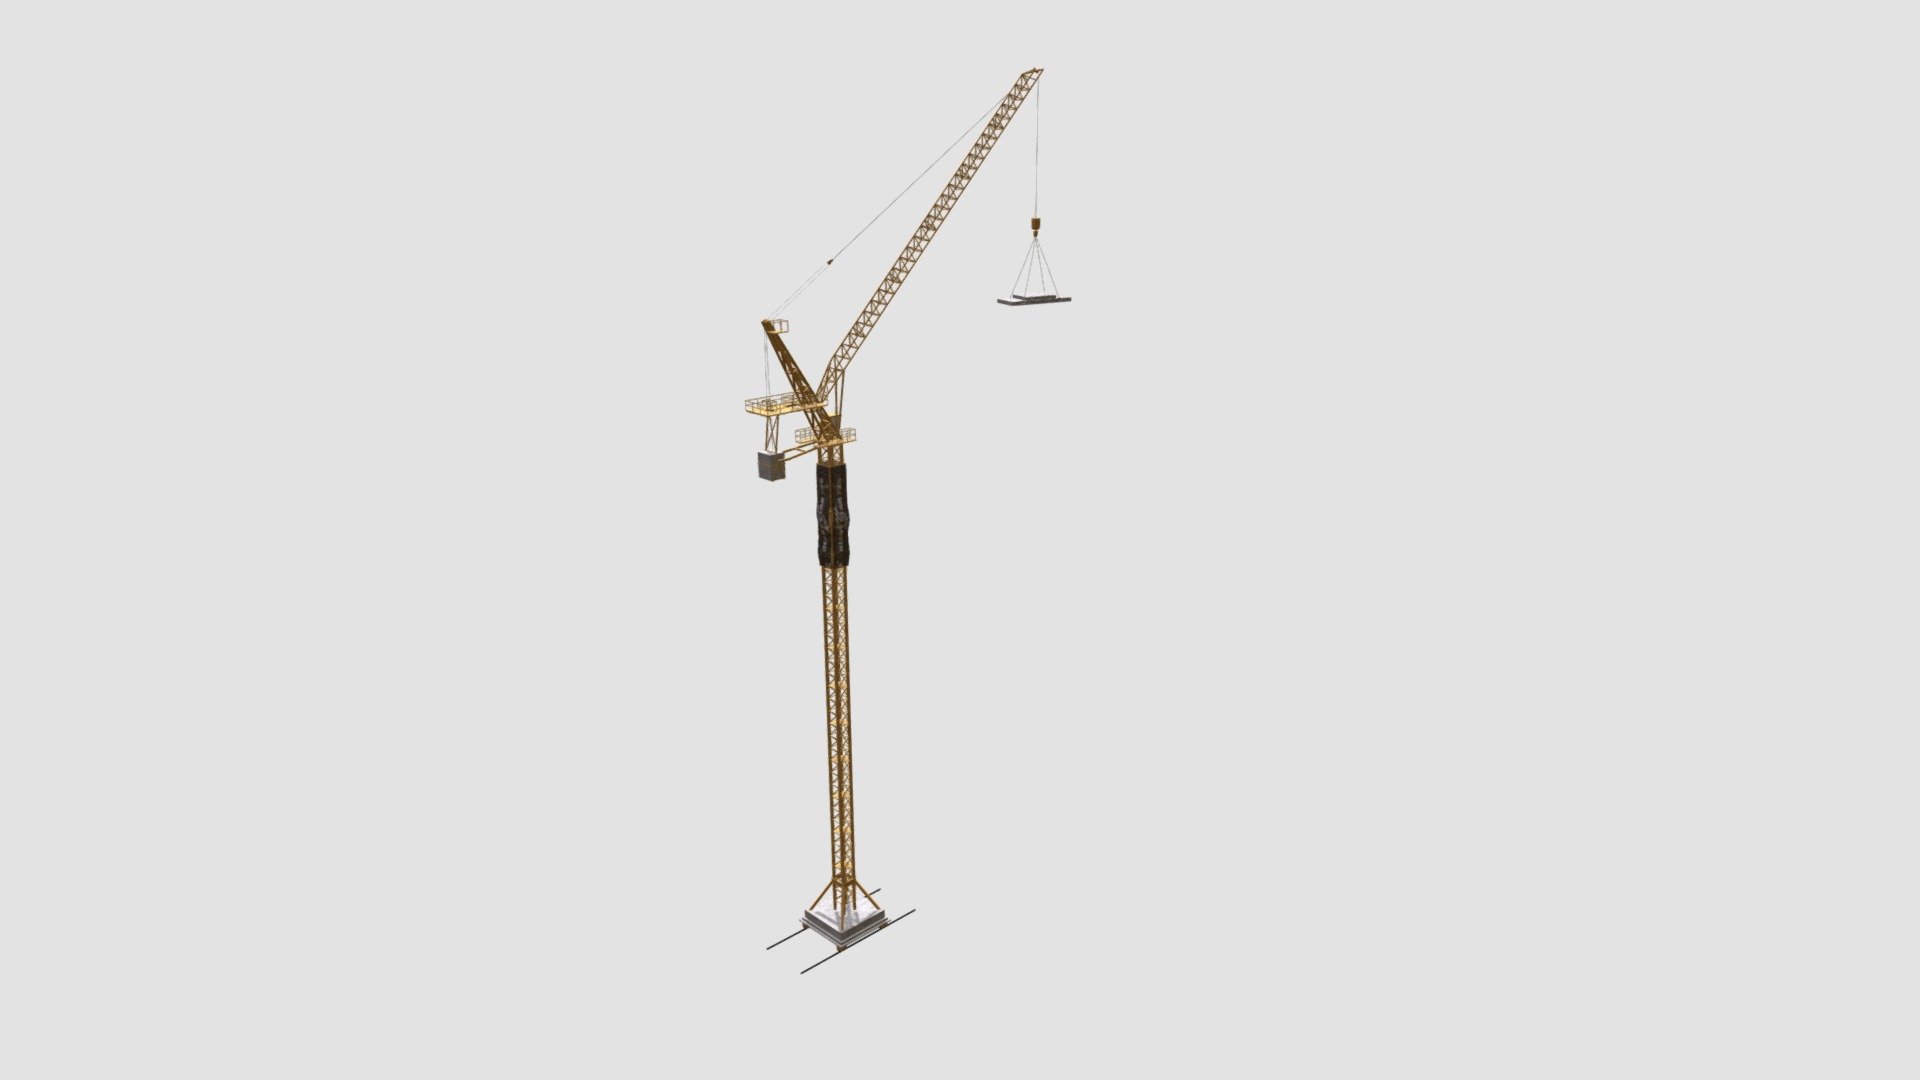 Highly detailed 3d model of construction crane with textures, shaders and materials. It is ready to use, just put it into your scene 3d model